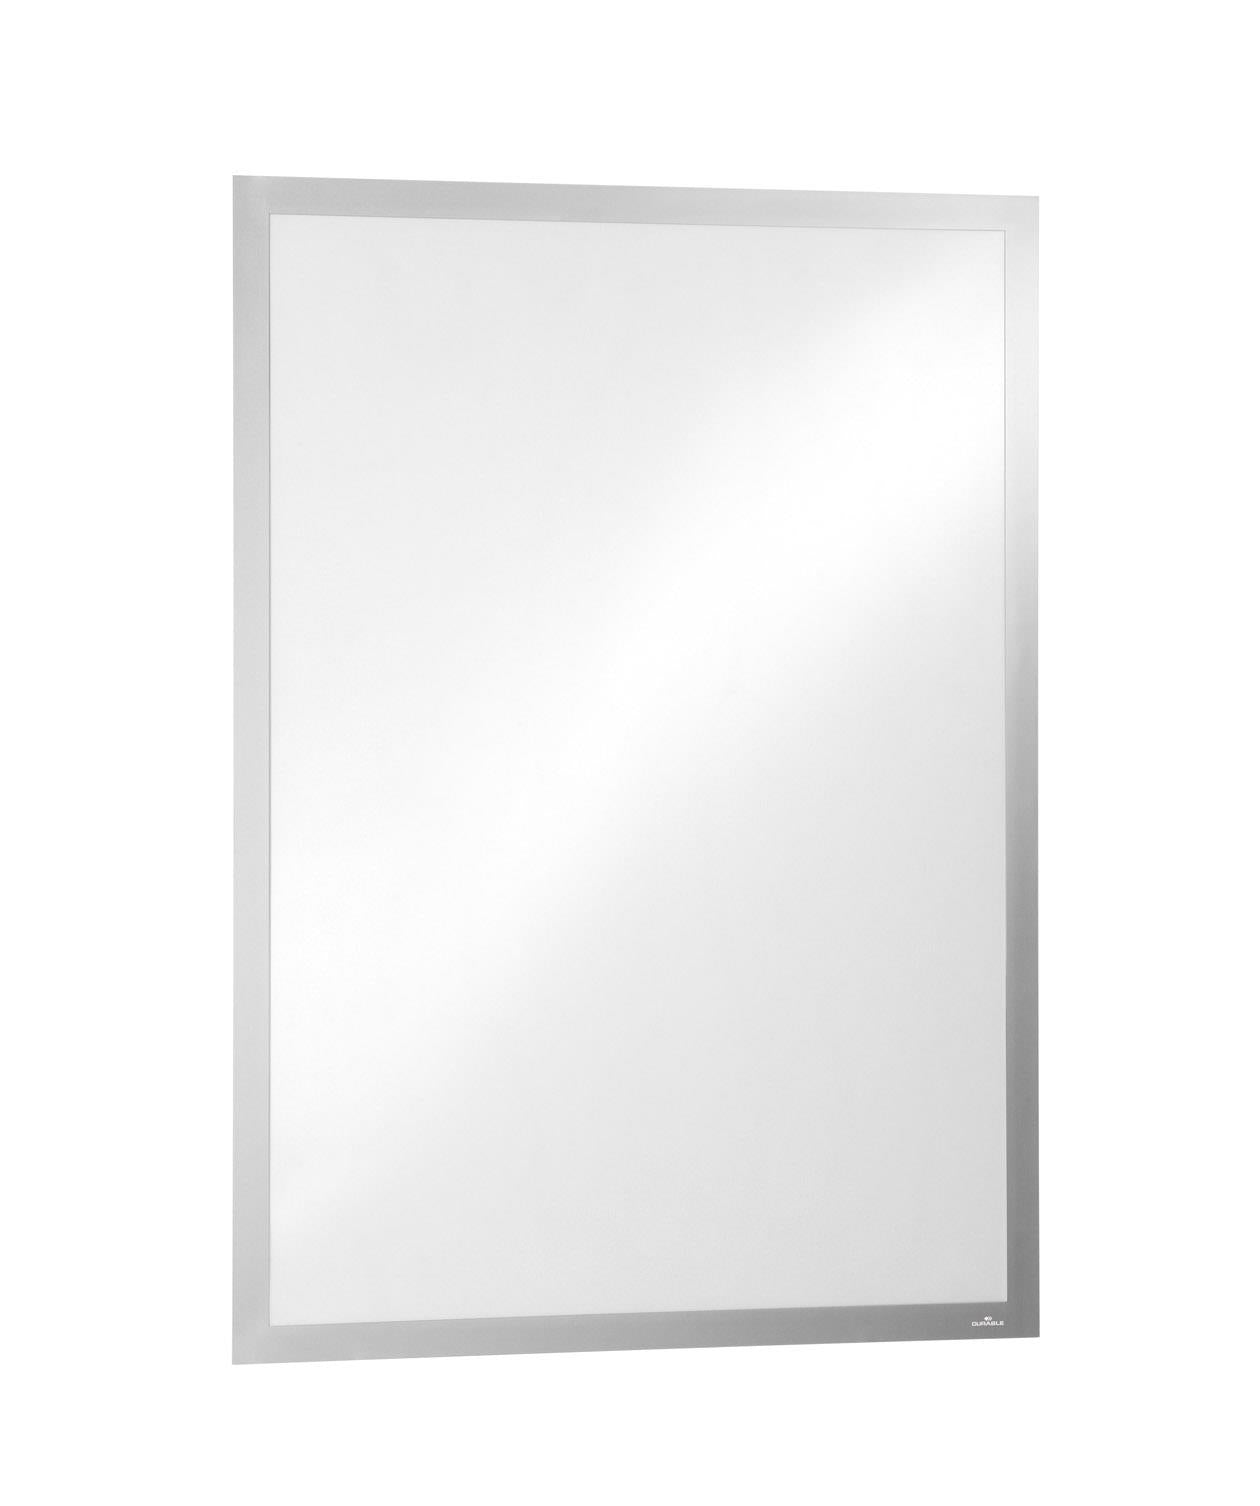 Durable DURAFRAME UV Poster Adhesive Magnetic Signage Frame | 50x70 cm | Silver